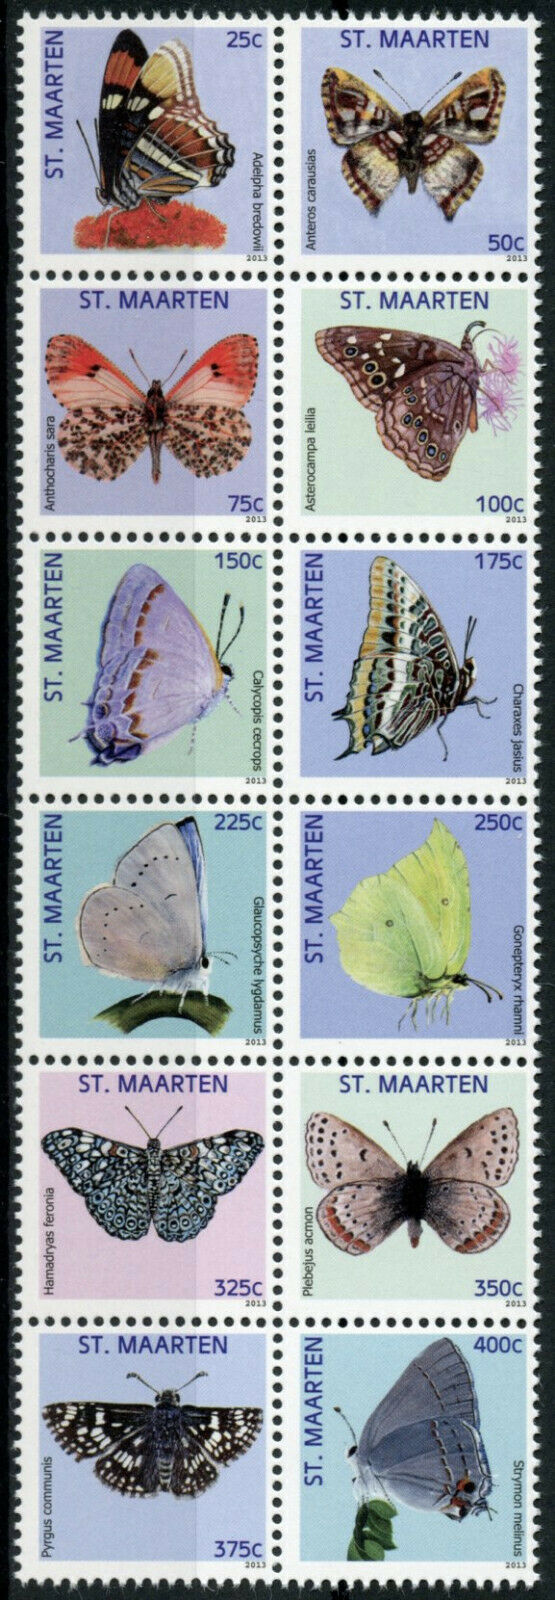 St Maarten Butterflies Stamps 2013 MNH Brimstone Butterfly Insects 12v Block